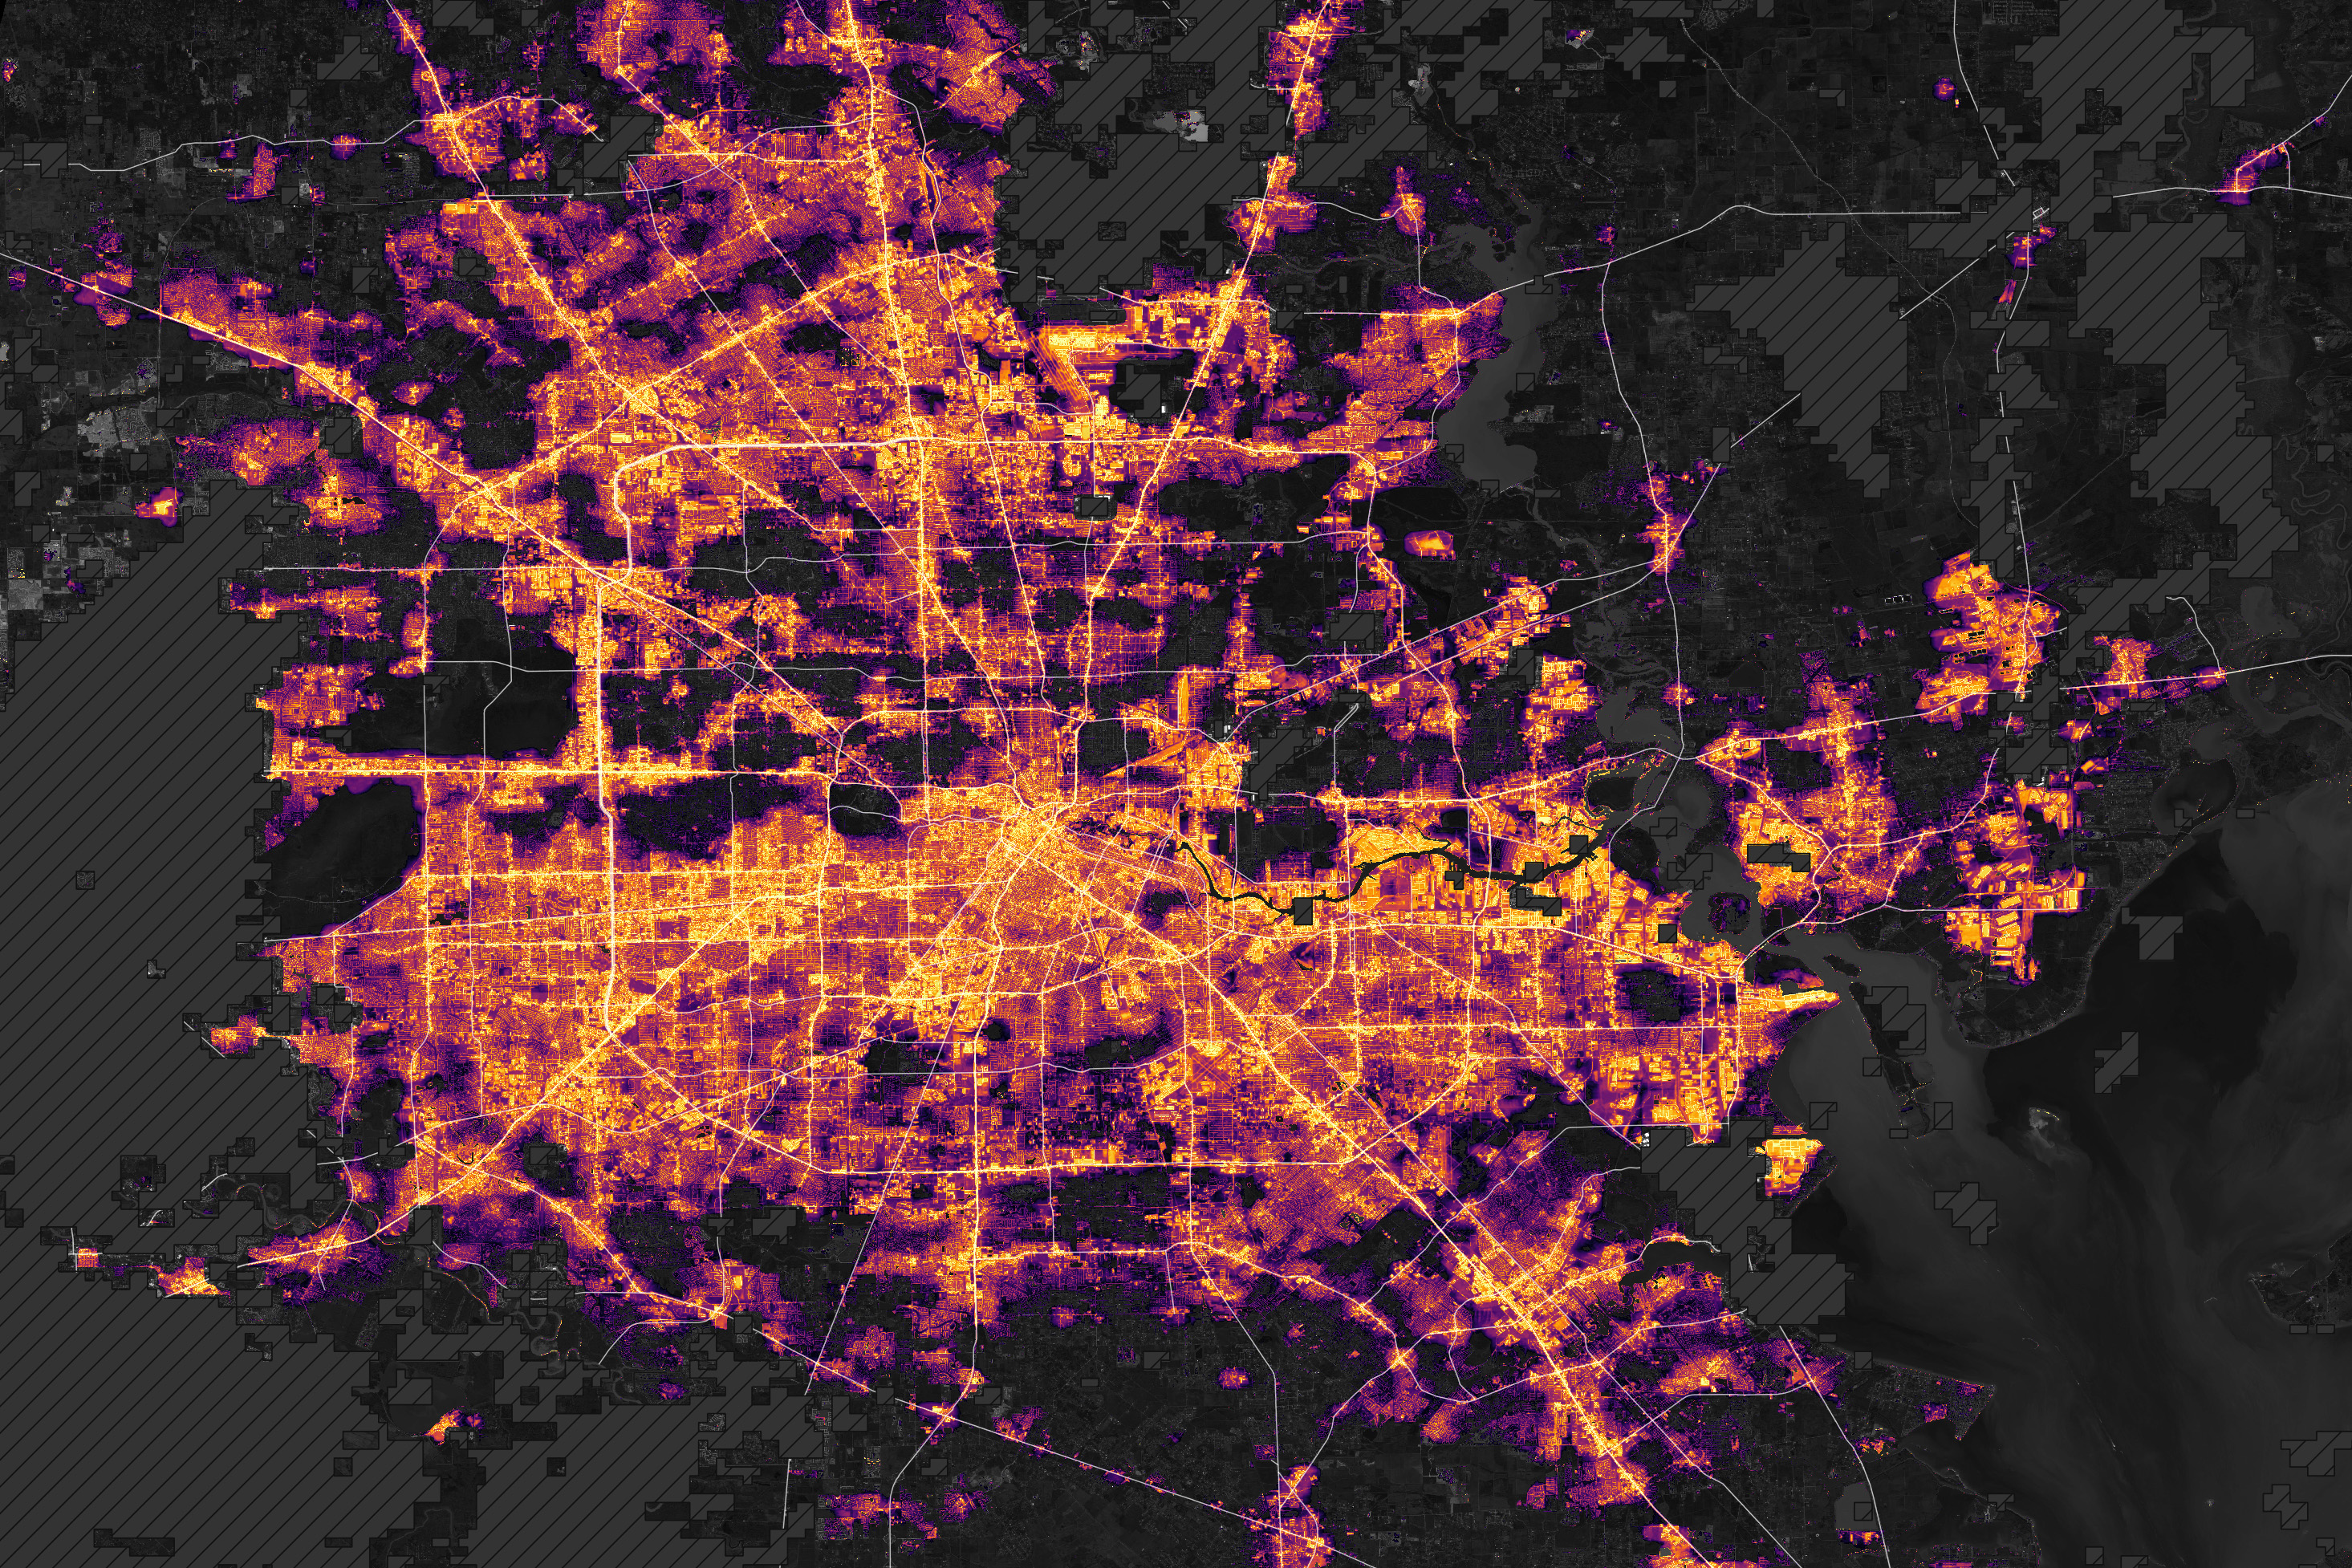 A night satellite image of greater Houston shows sprawling grids of major roadways brightly illuminated. However, there are pockets of darkness within what are highly populated areas that should be accordingly illuminated.